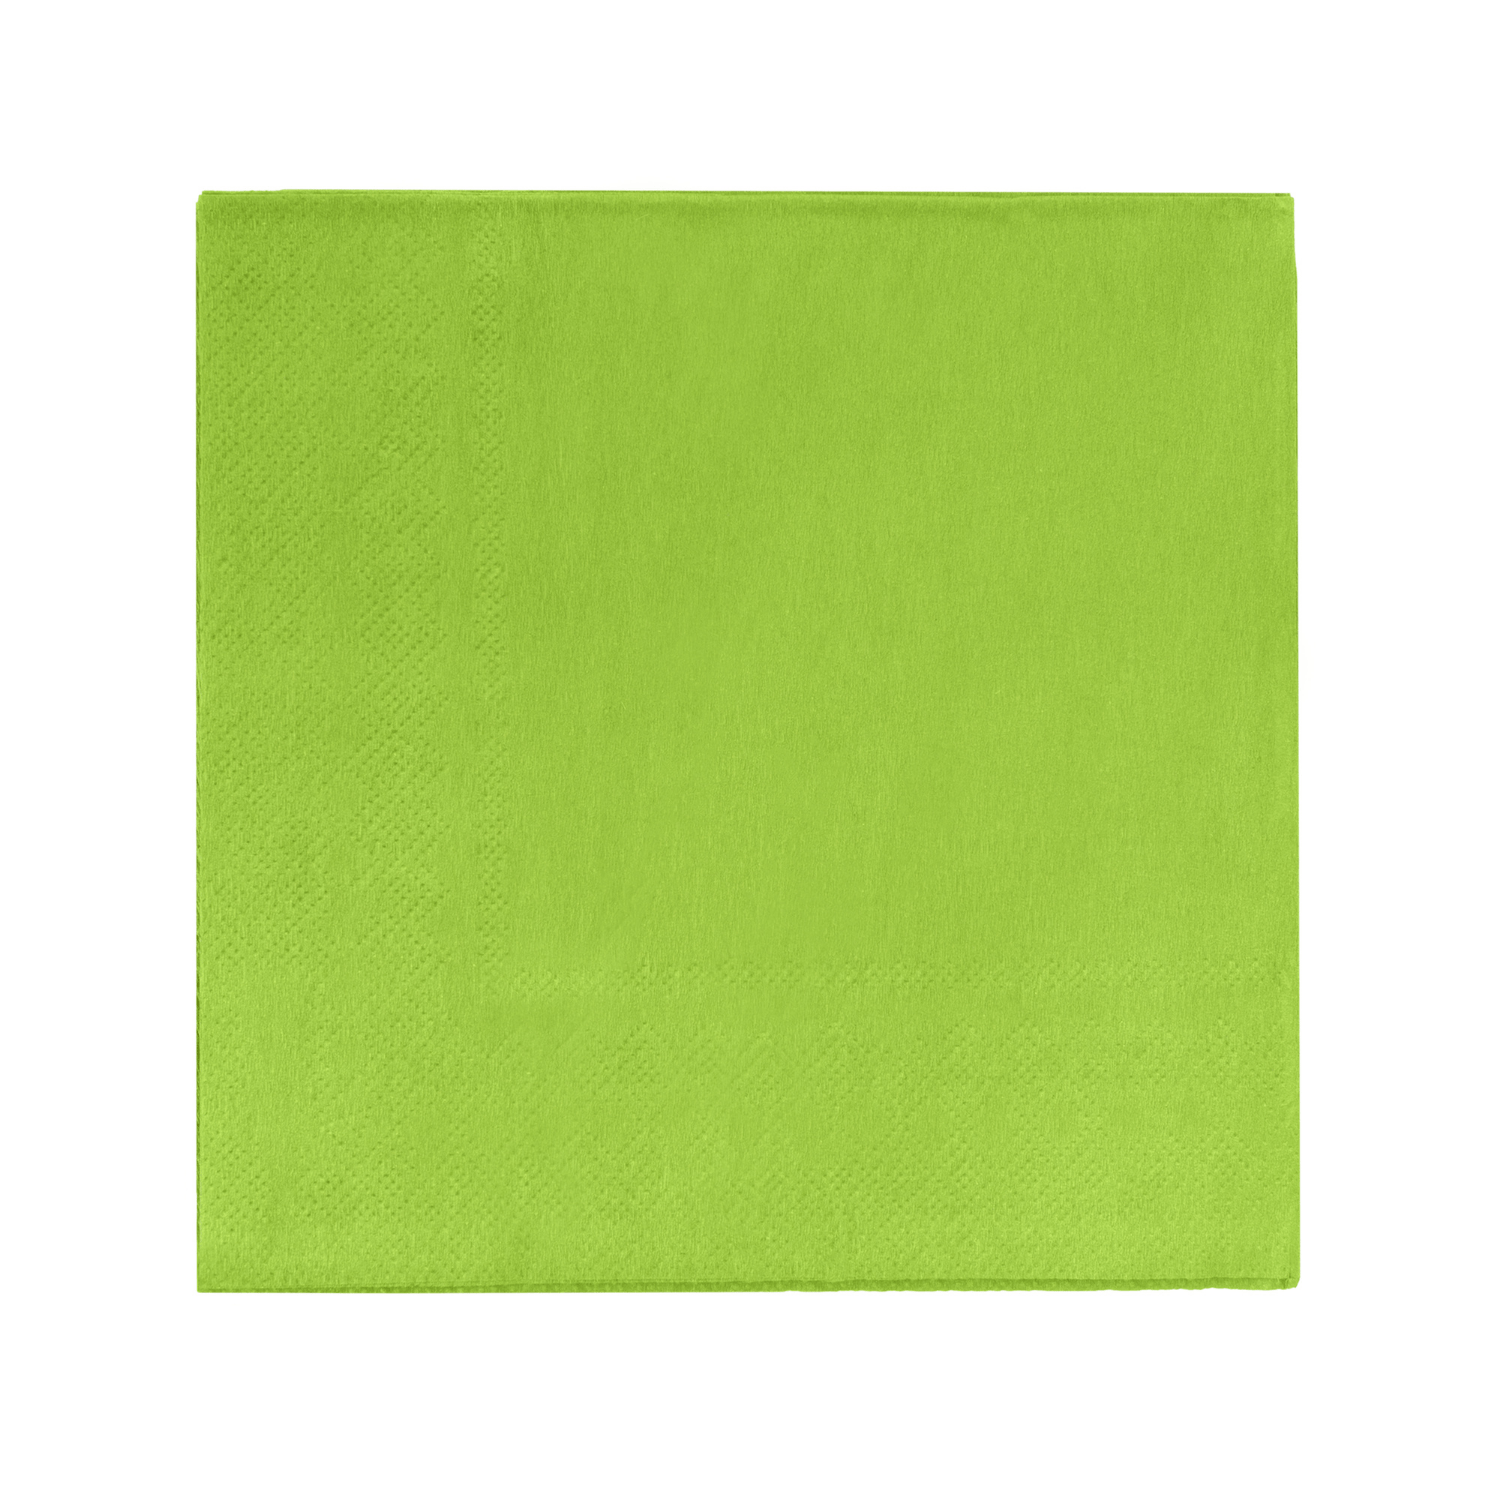 Lime Green Luncheon Napkins | 3600 Pack - Yom Tov Settings